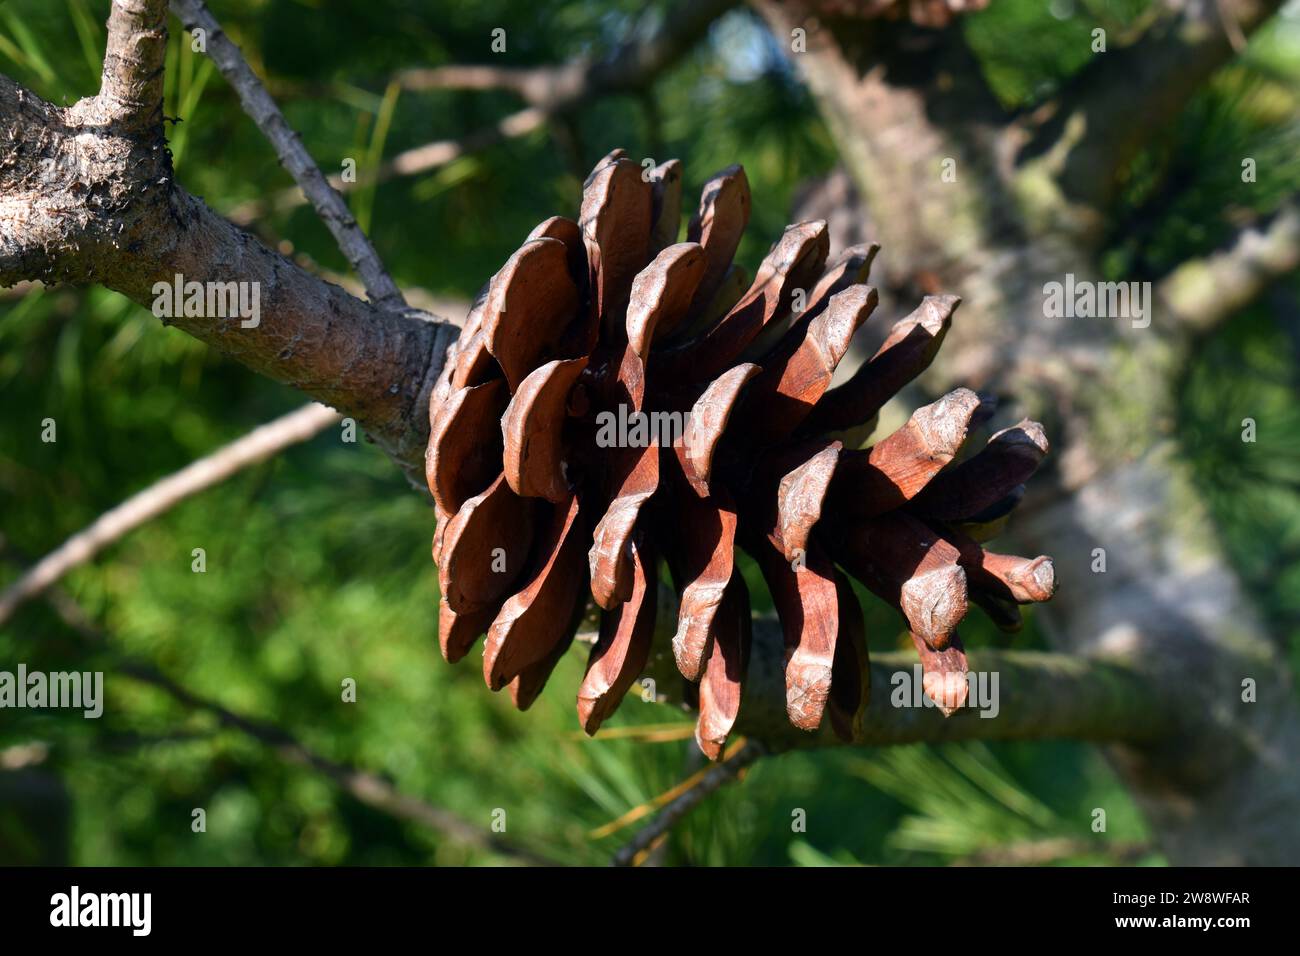 Leaves and cones of Macedonian pine (Pinus peuce) Stock Photo